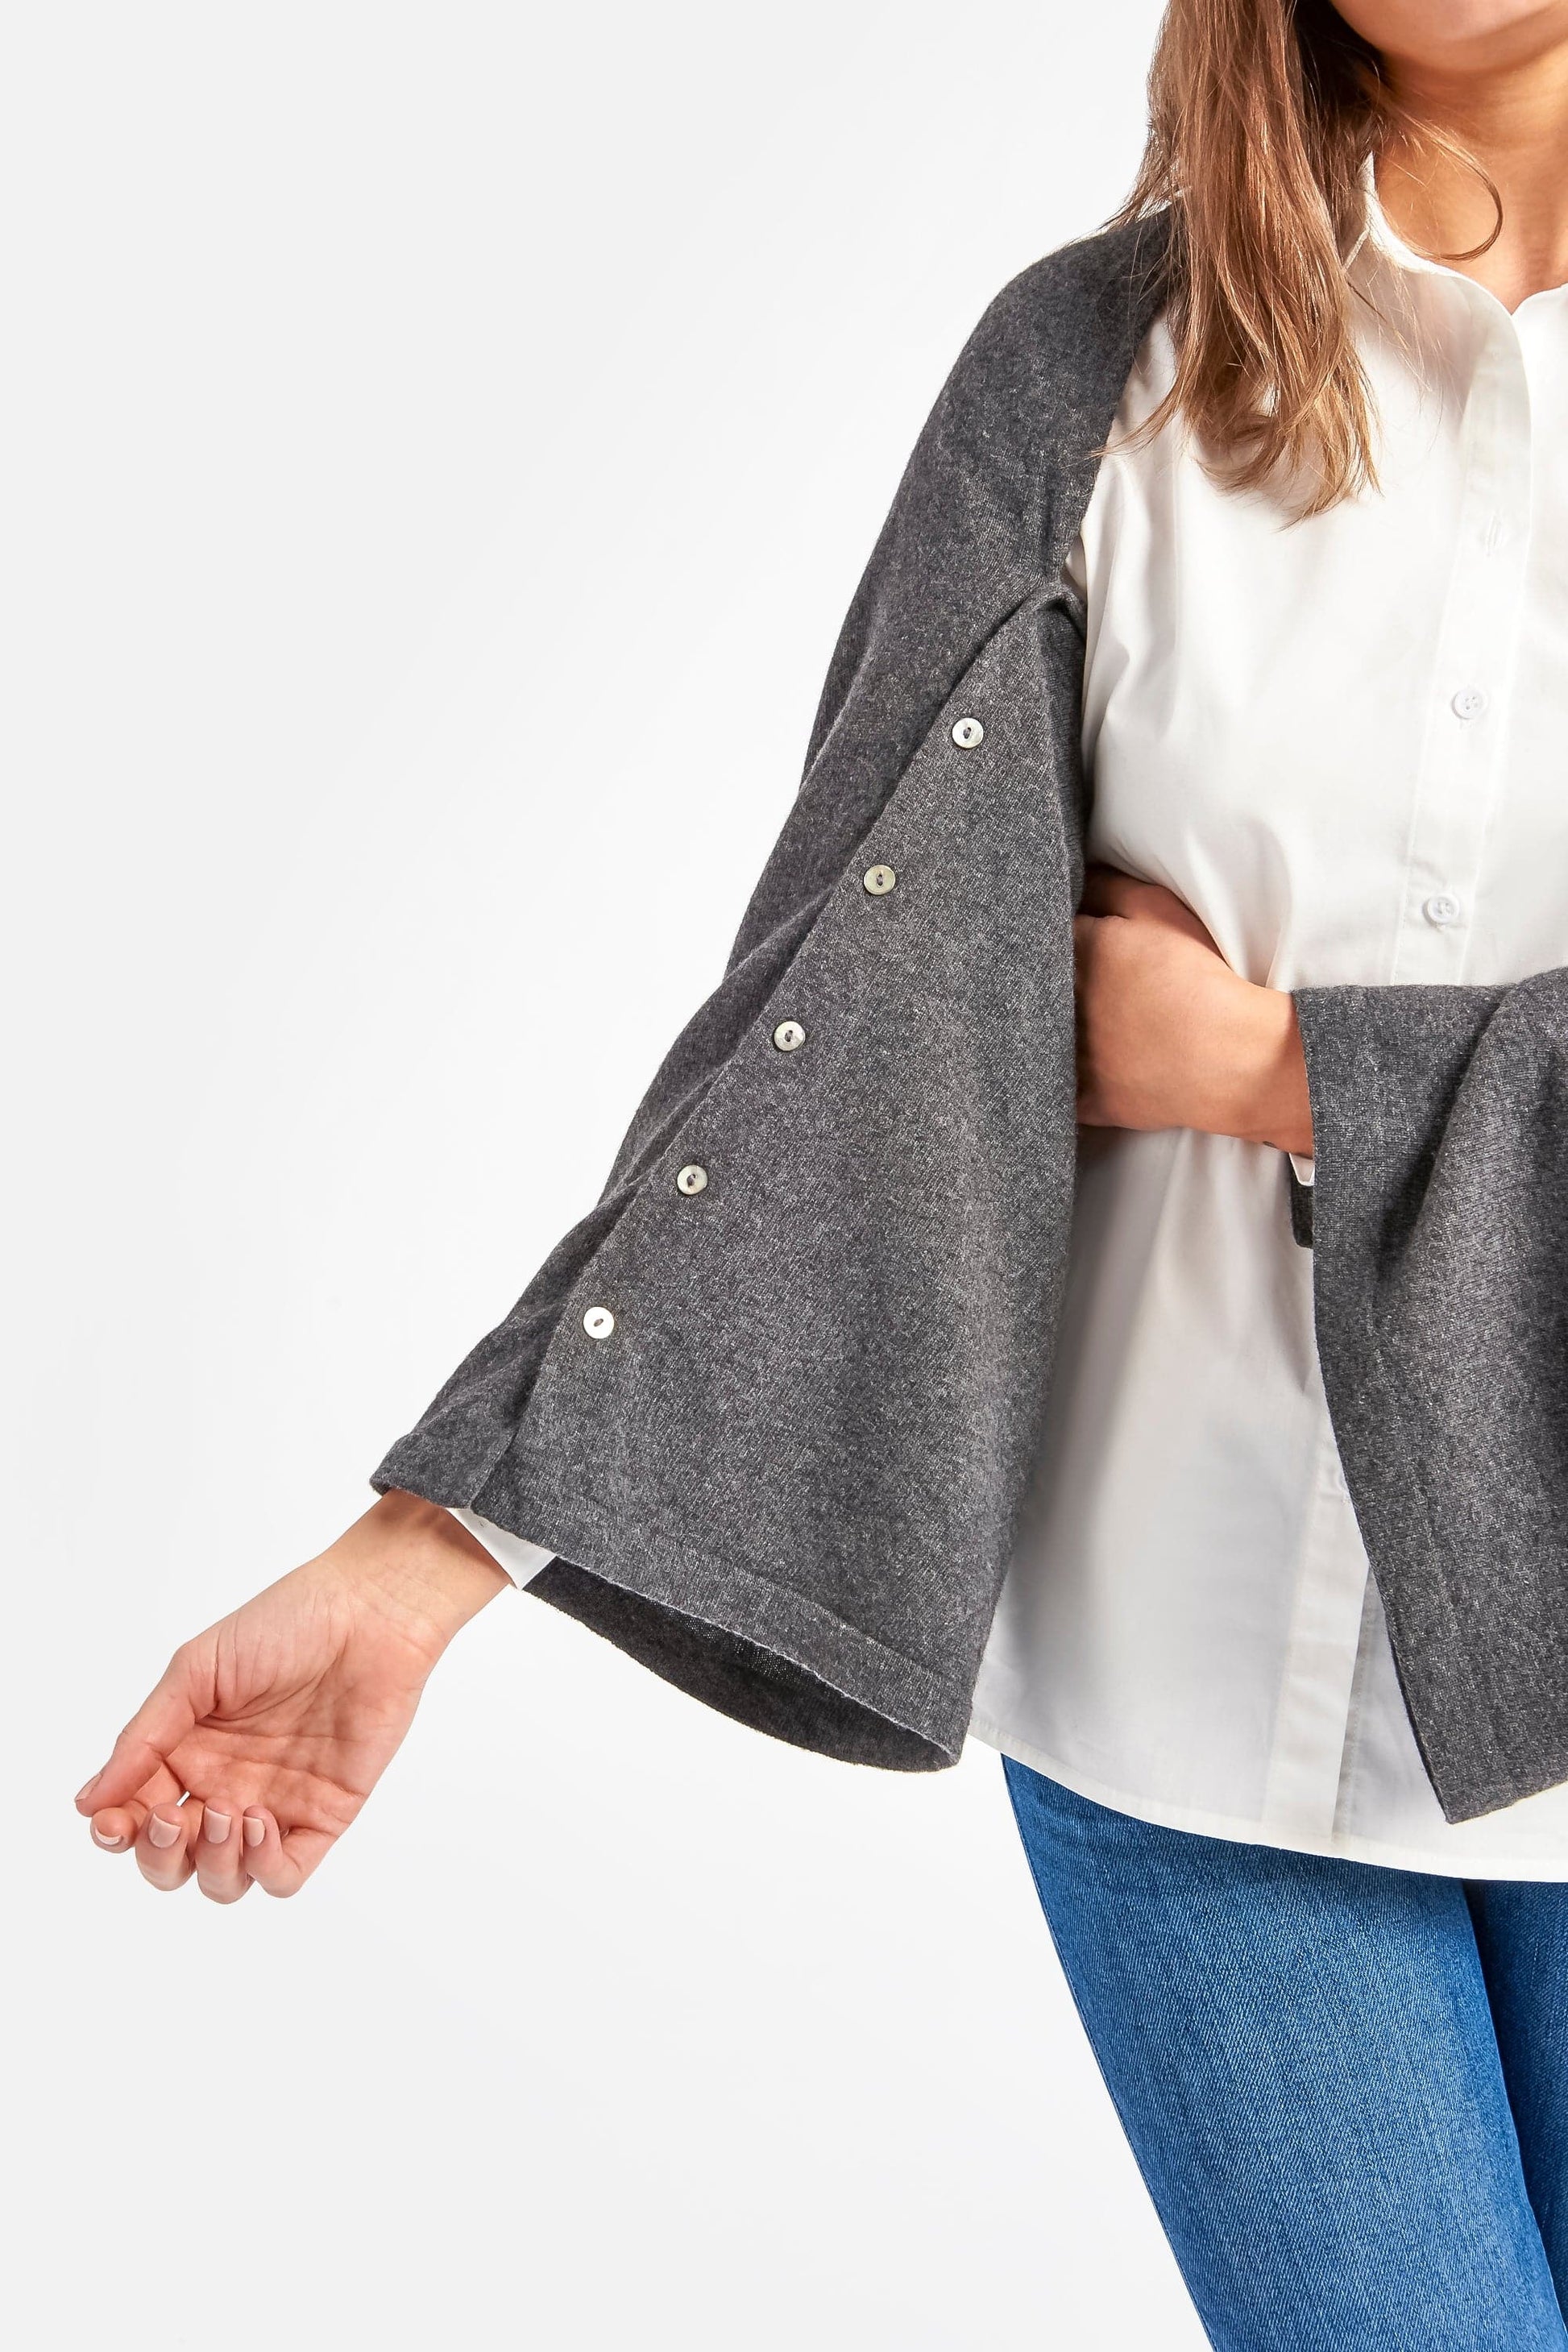 Cashmere & Merino Wool Long Length Button Poncho in Slate Grey by Woodcock & Cavendish for sale - Woodcock and Cavendish